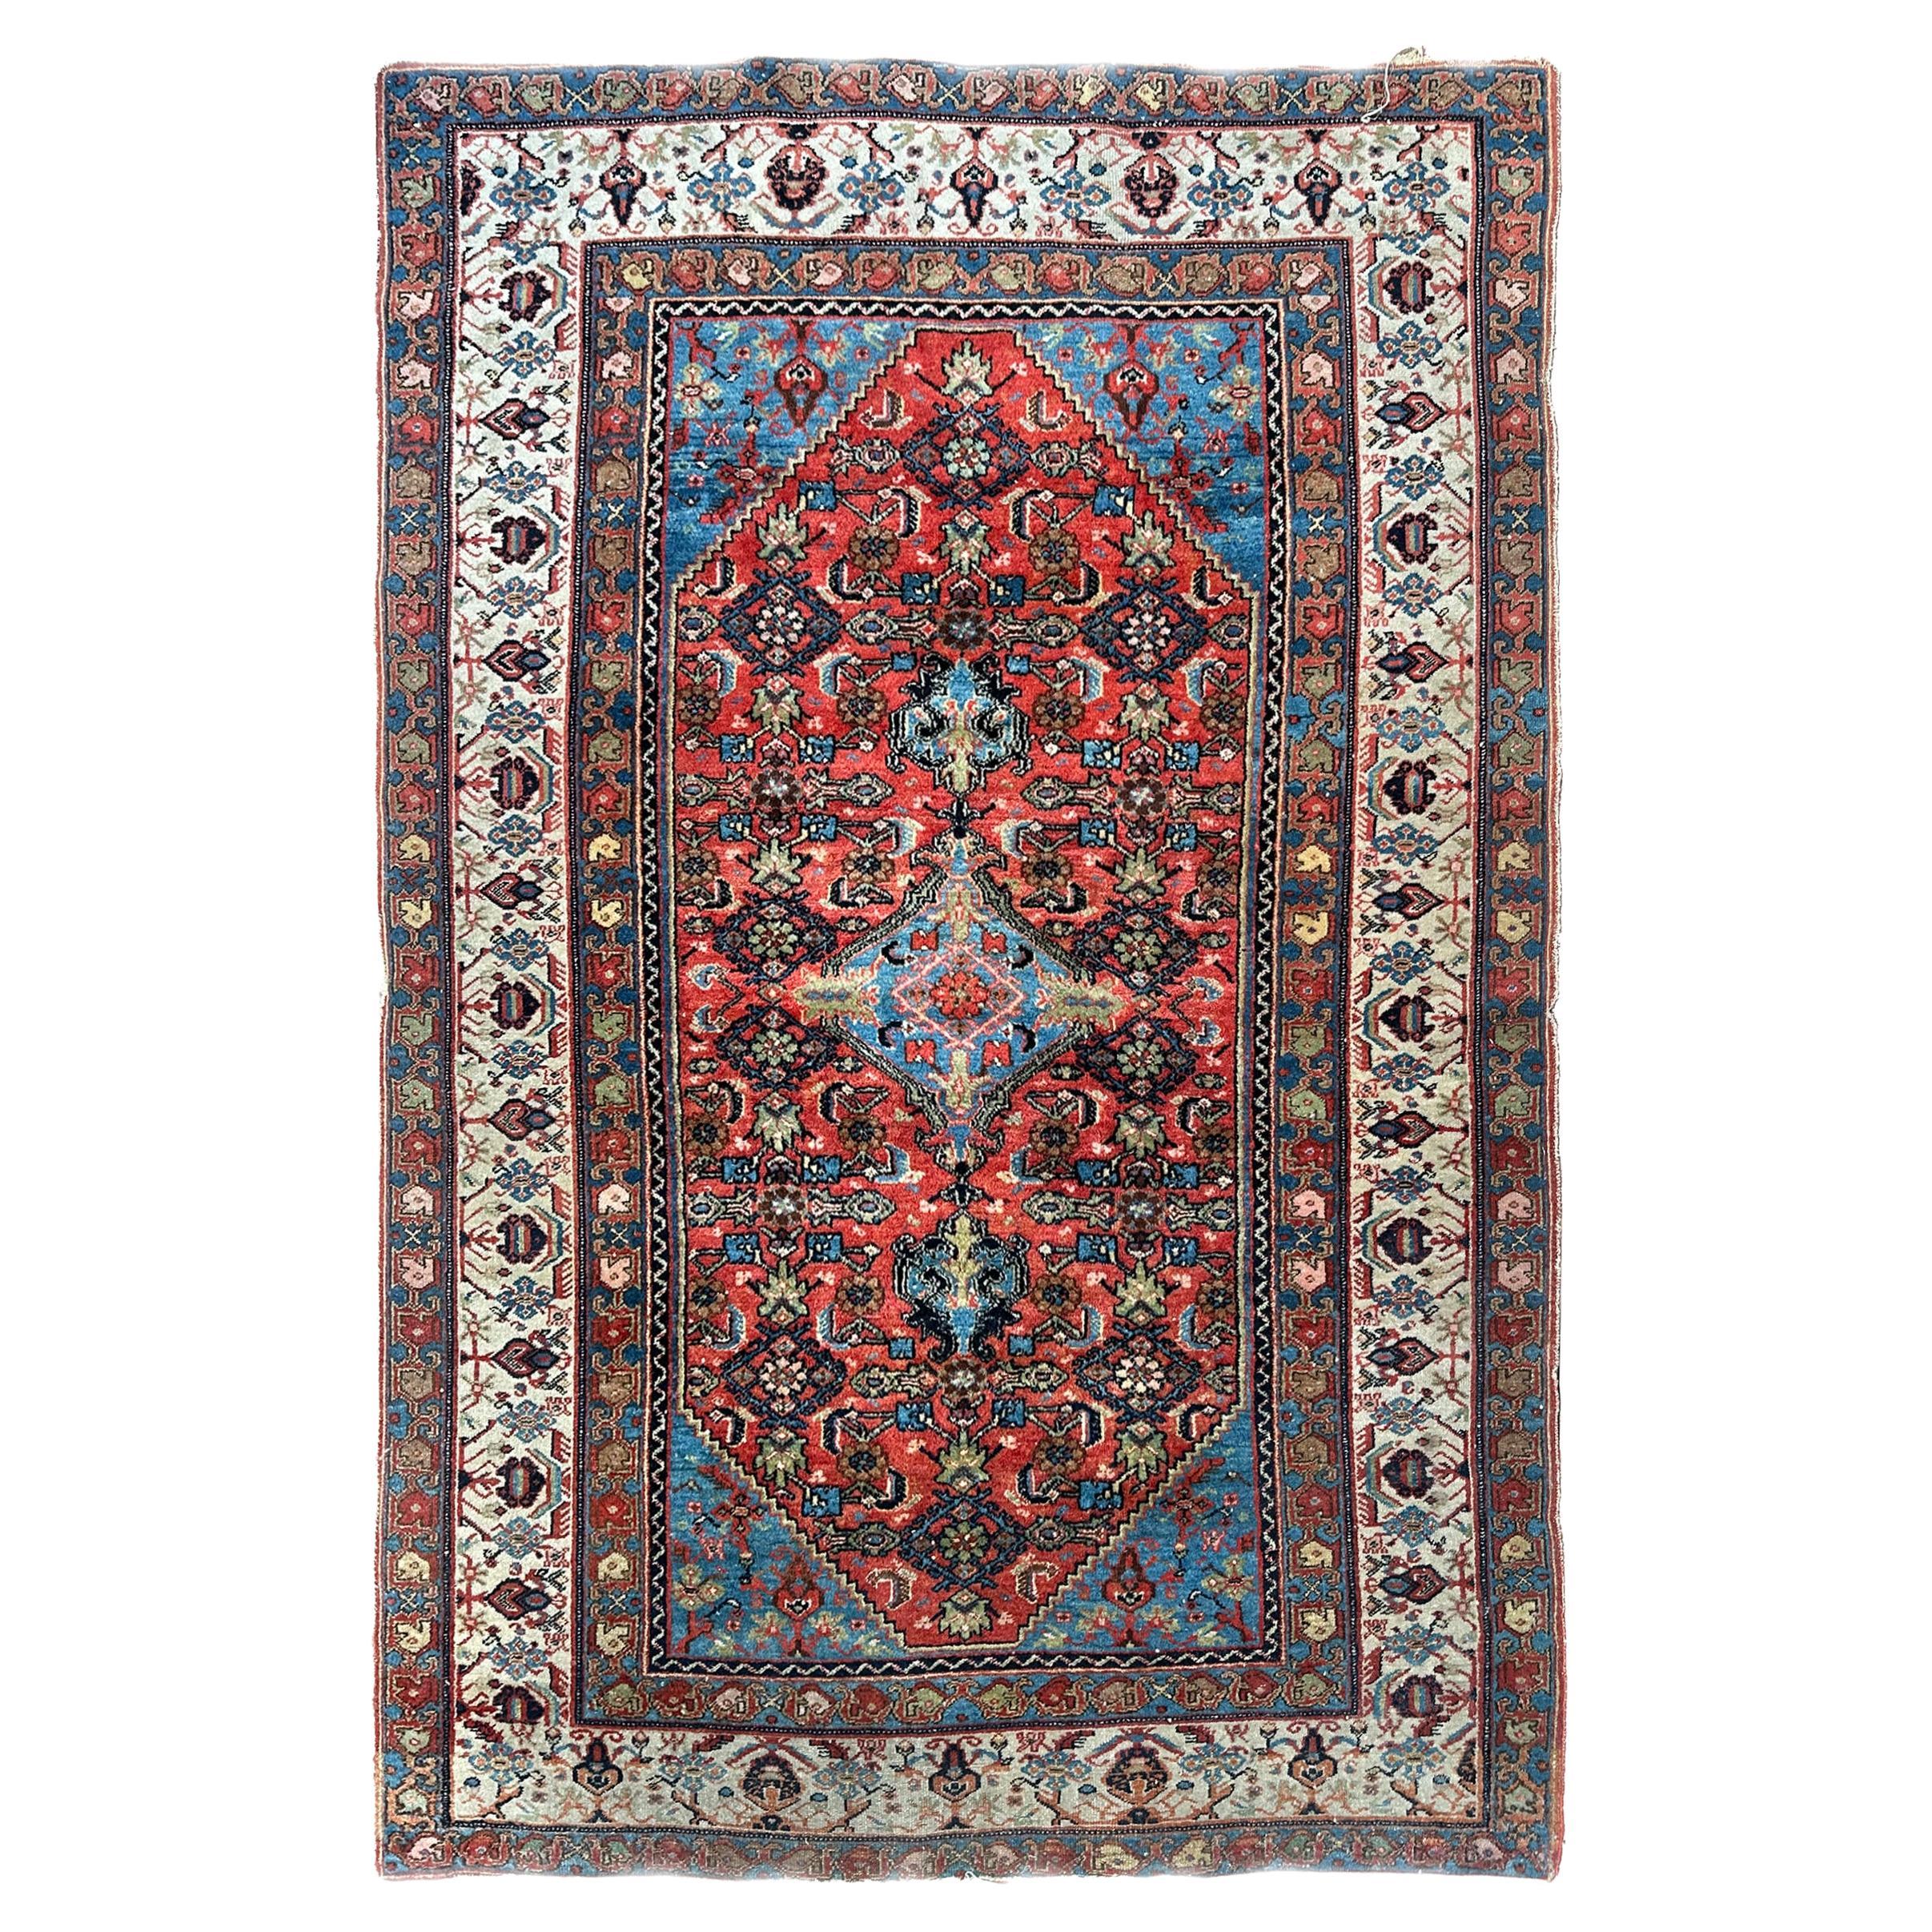 1890 Antique Traditional Oriental Rug Exceptionally fine Rug 5x6 153cm x 191cm For Sale